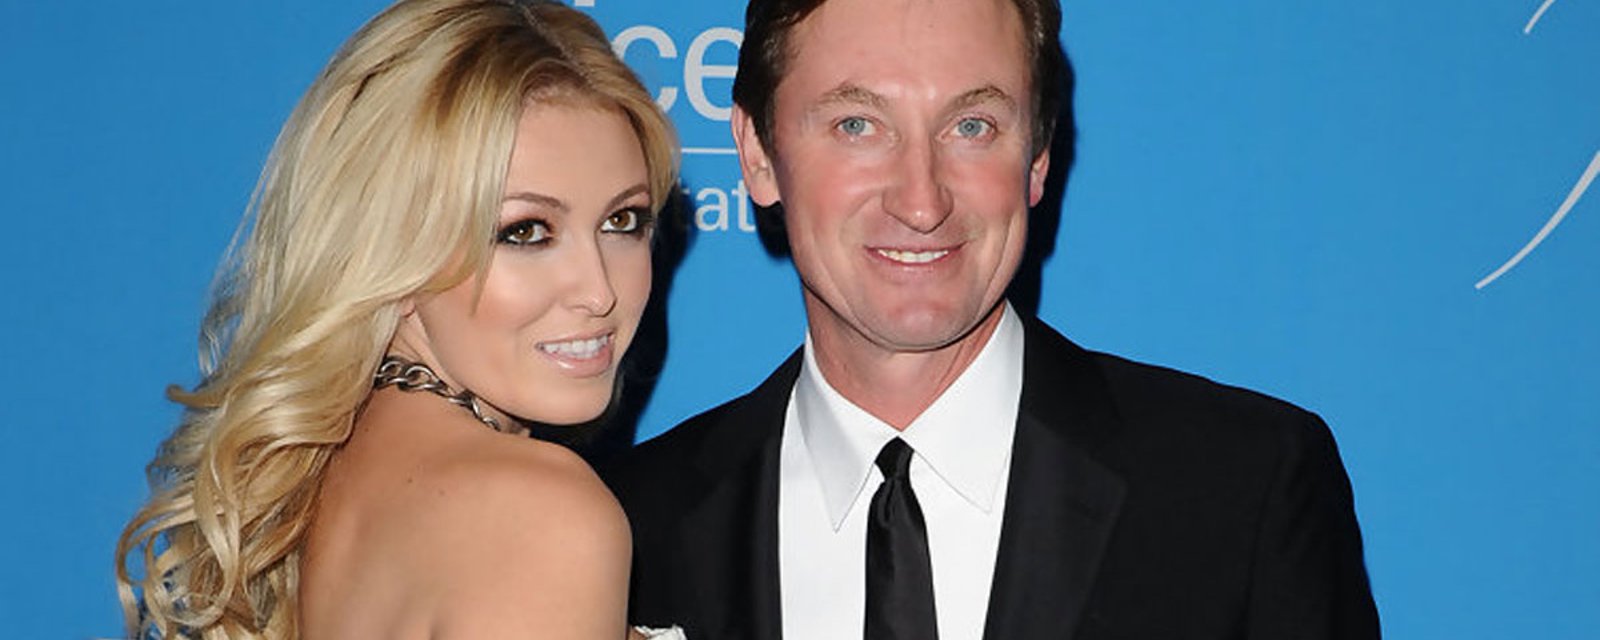 There's the most embarrassing mistake on Gretzky and gorgeous daughter’s sponsored ad! 